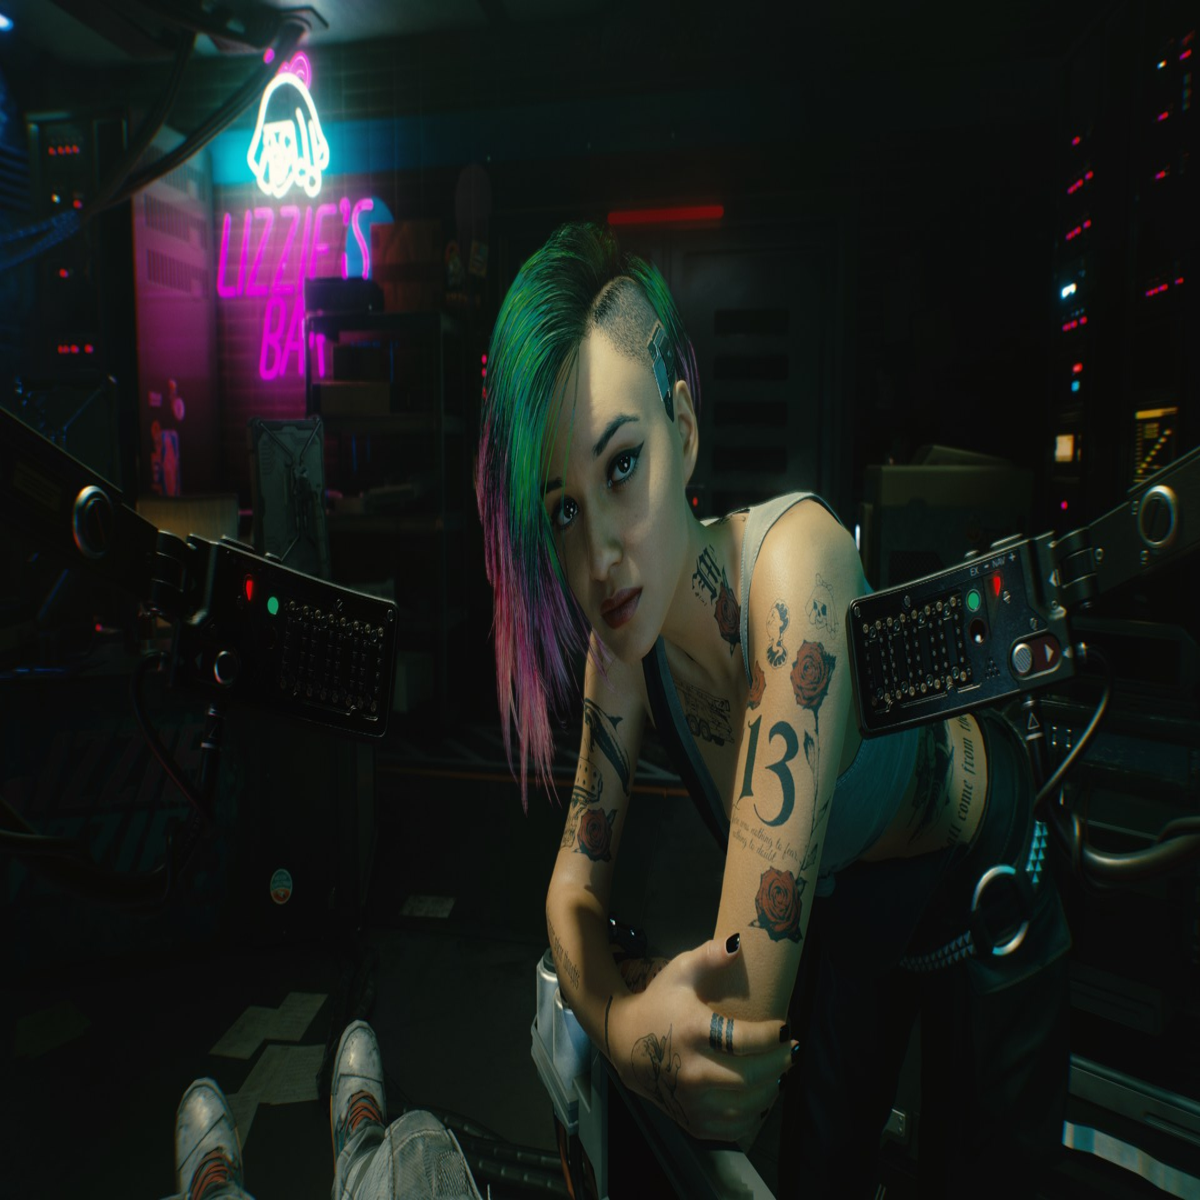 Here's Why Cyberpunk 2077's Planned Multiplayer Mode Got Axed